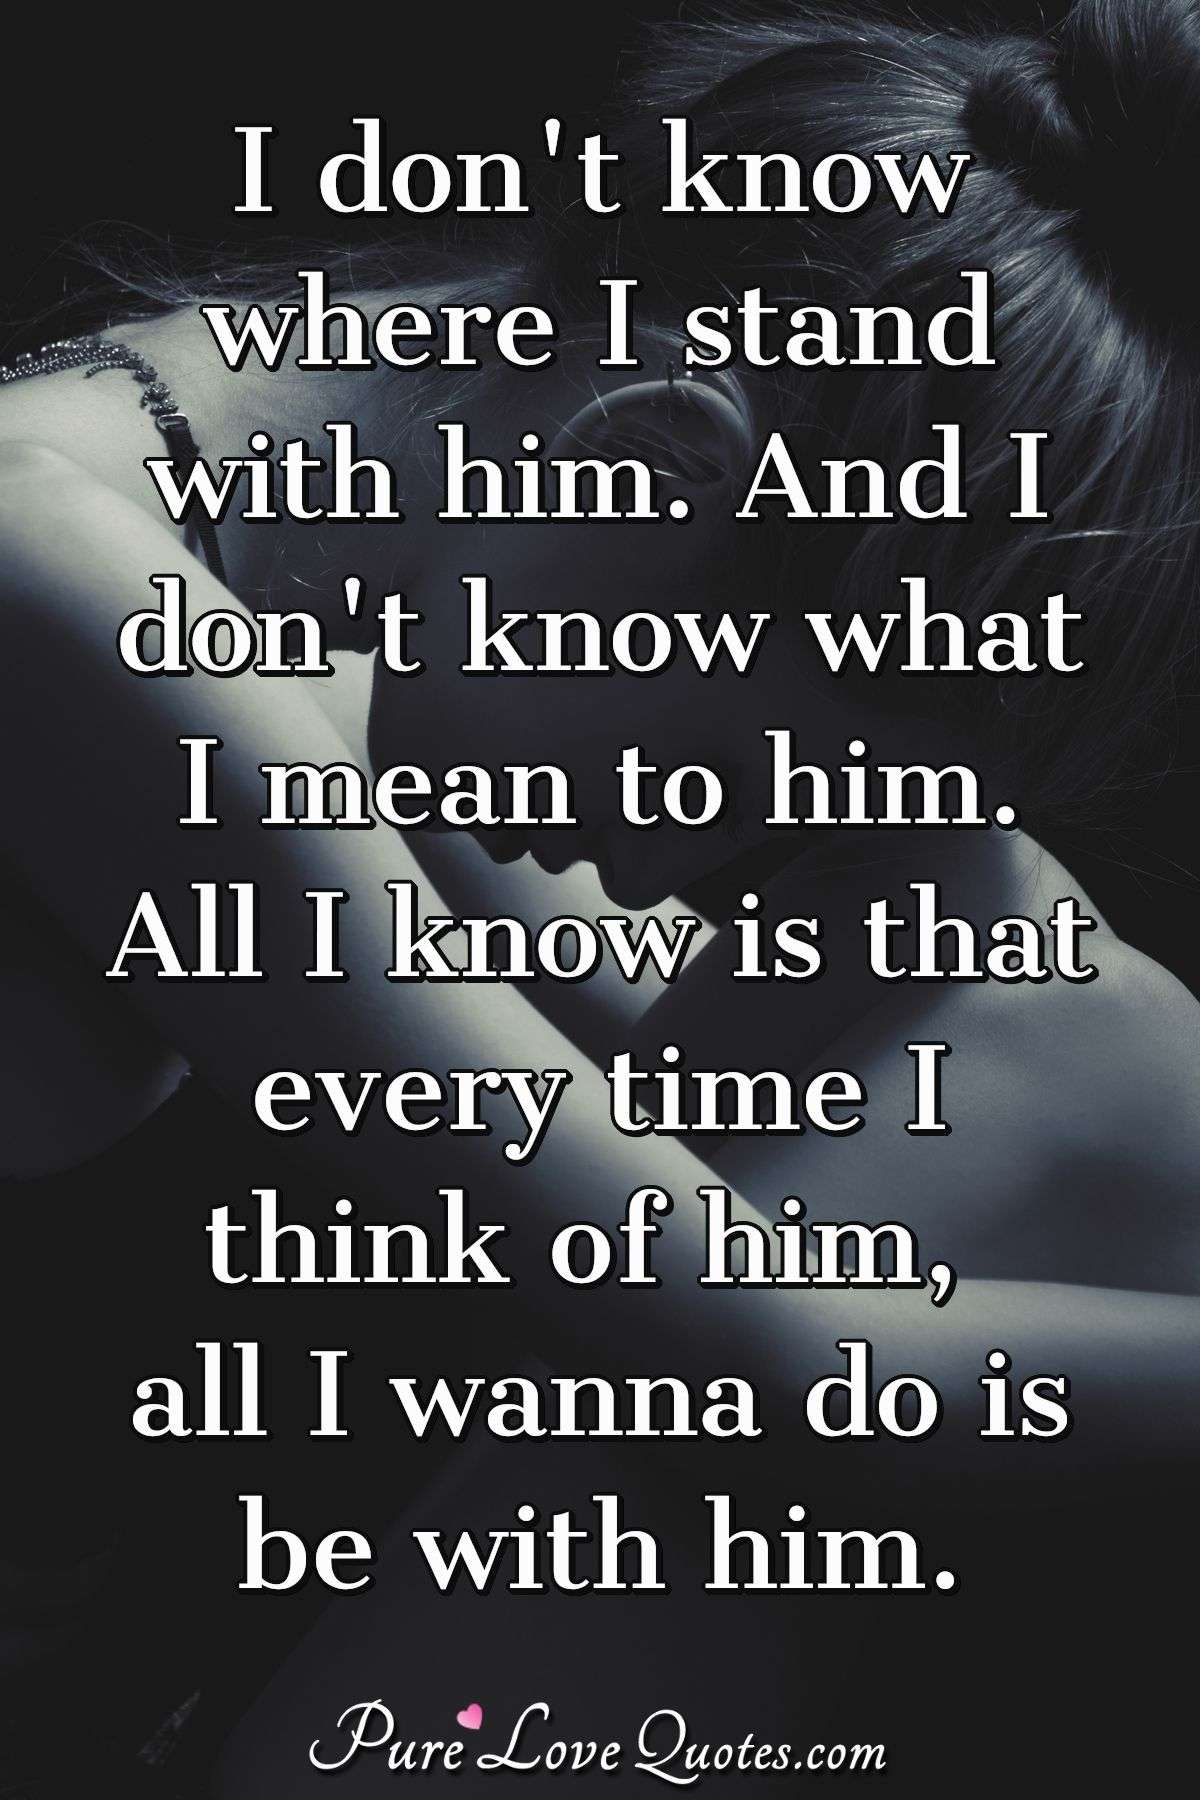 I don't know where I stand with him. And I don't know what I mean to him. All I know is that every time I think of him, all I wanna do is be with him. - Anonymous